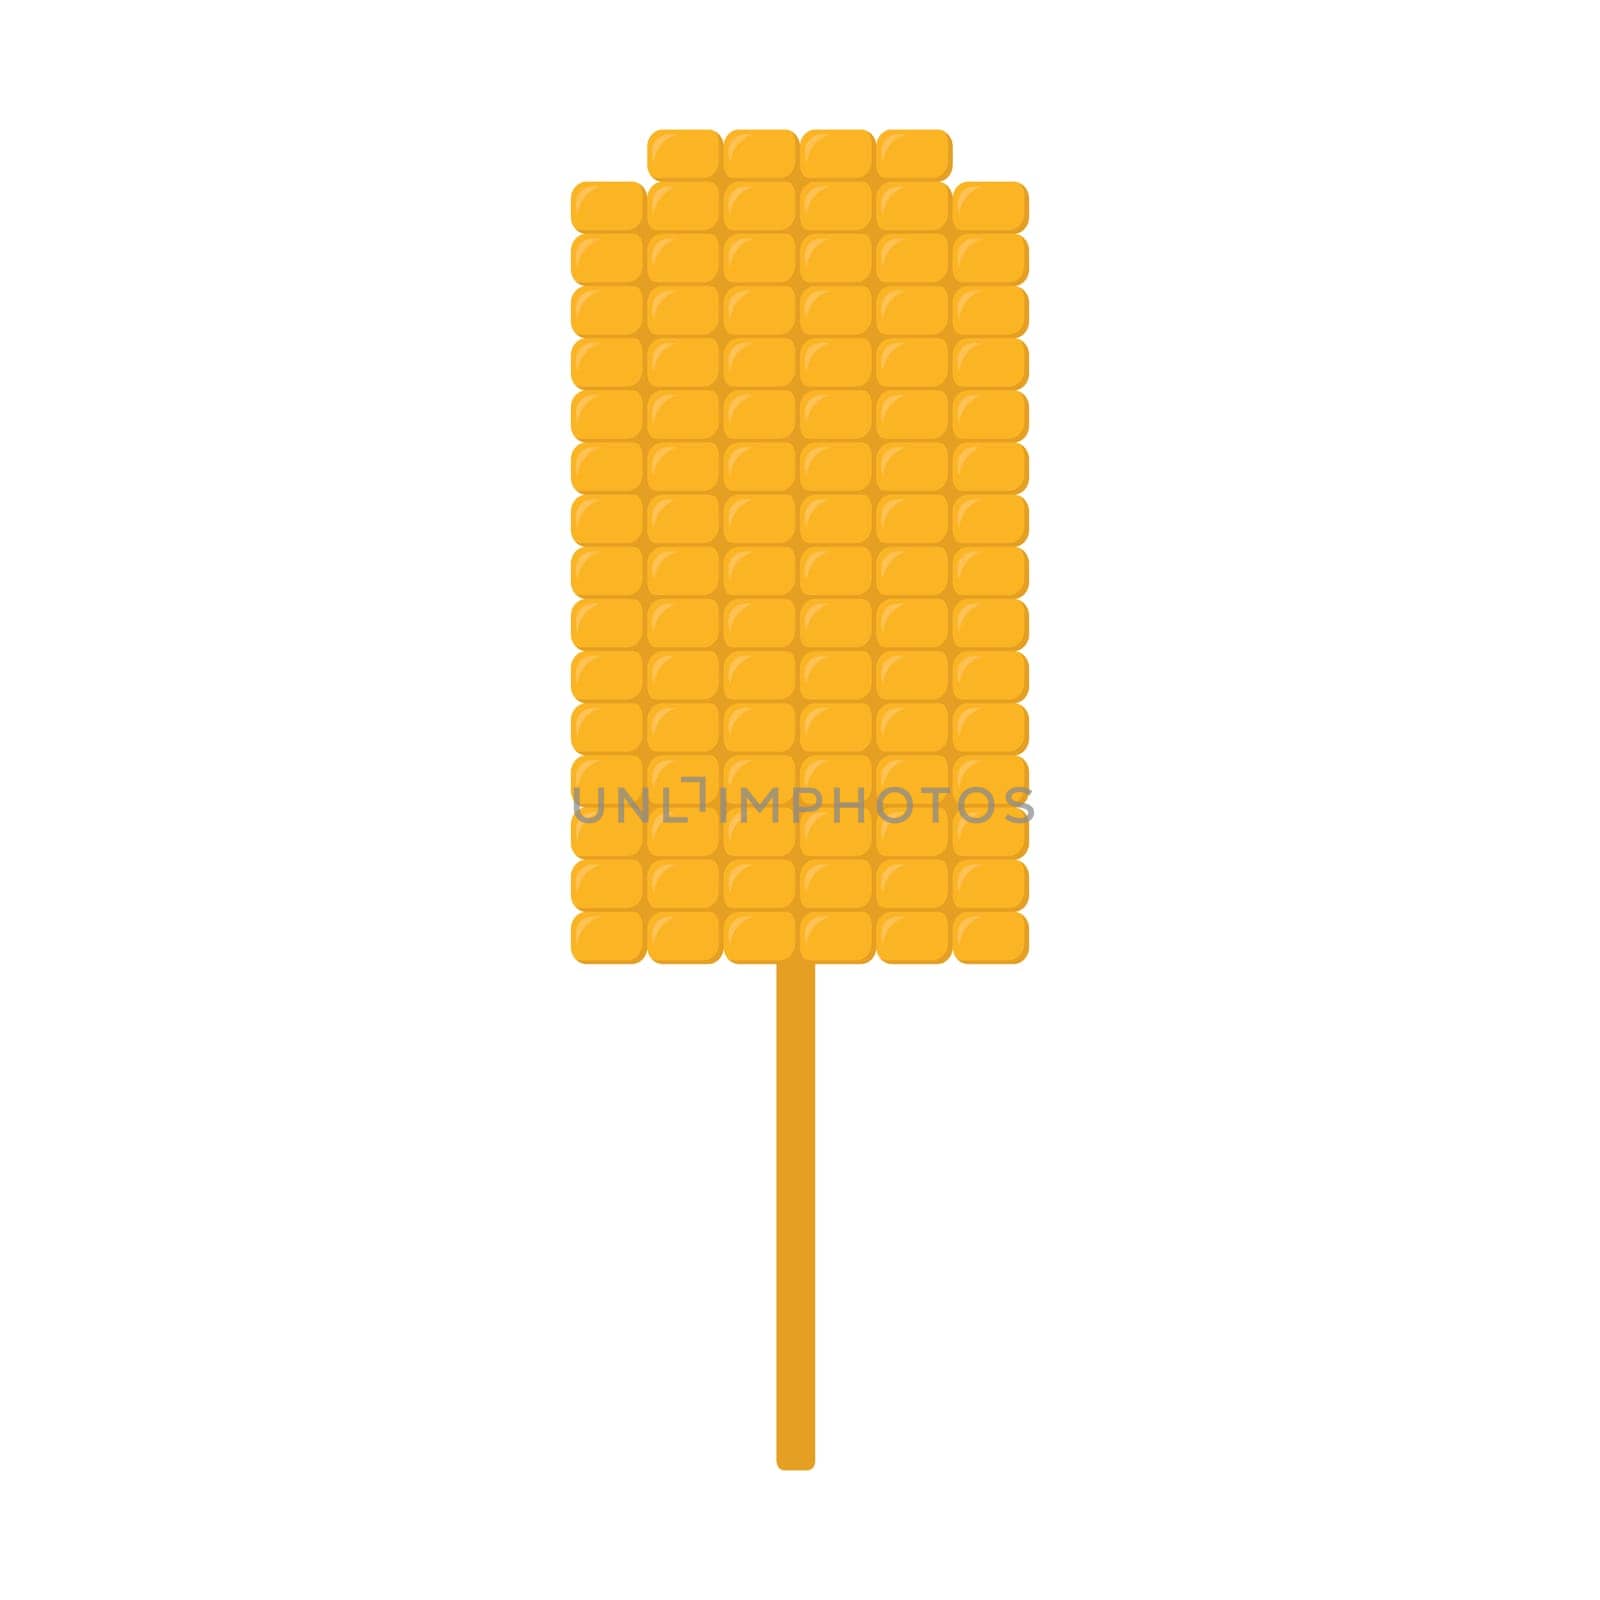 Corn on a stick. Traditional Mexican food on a white background. Smple icon